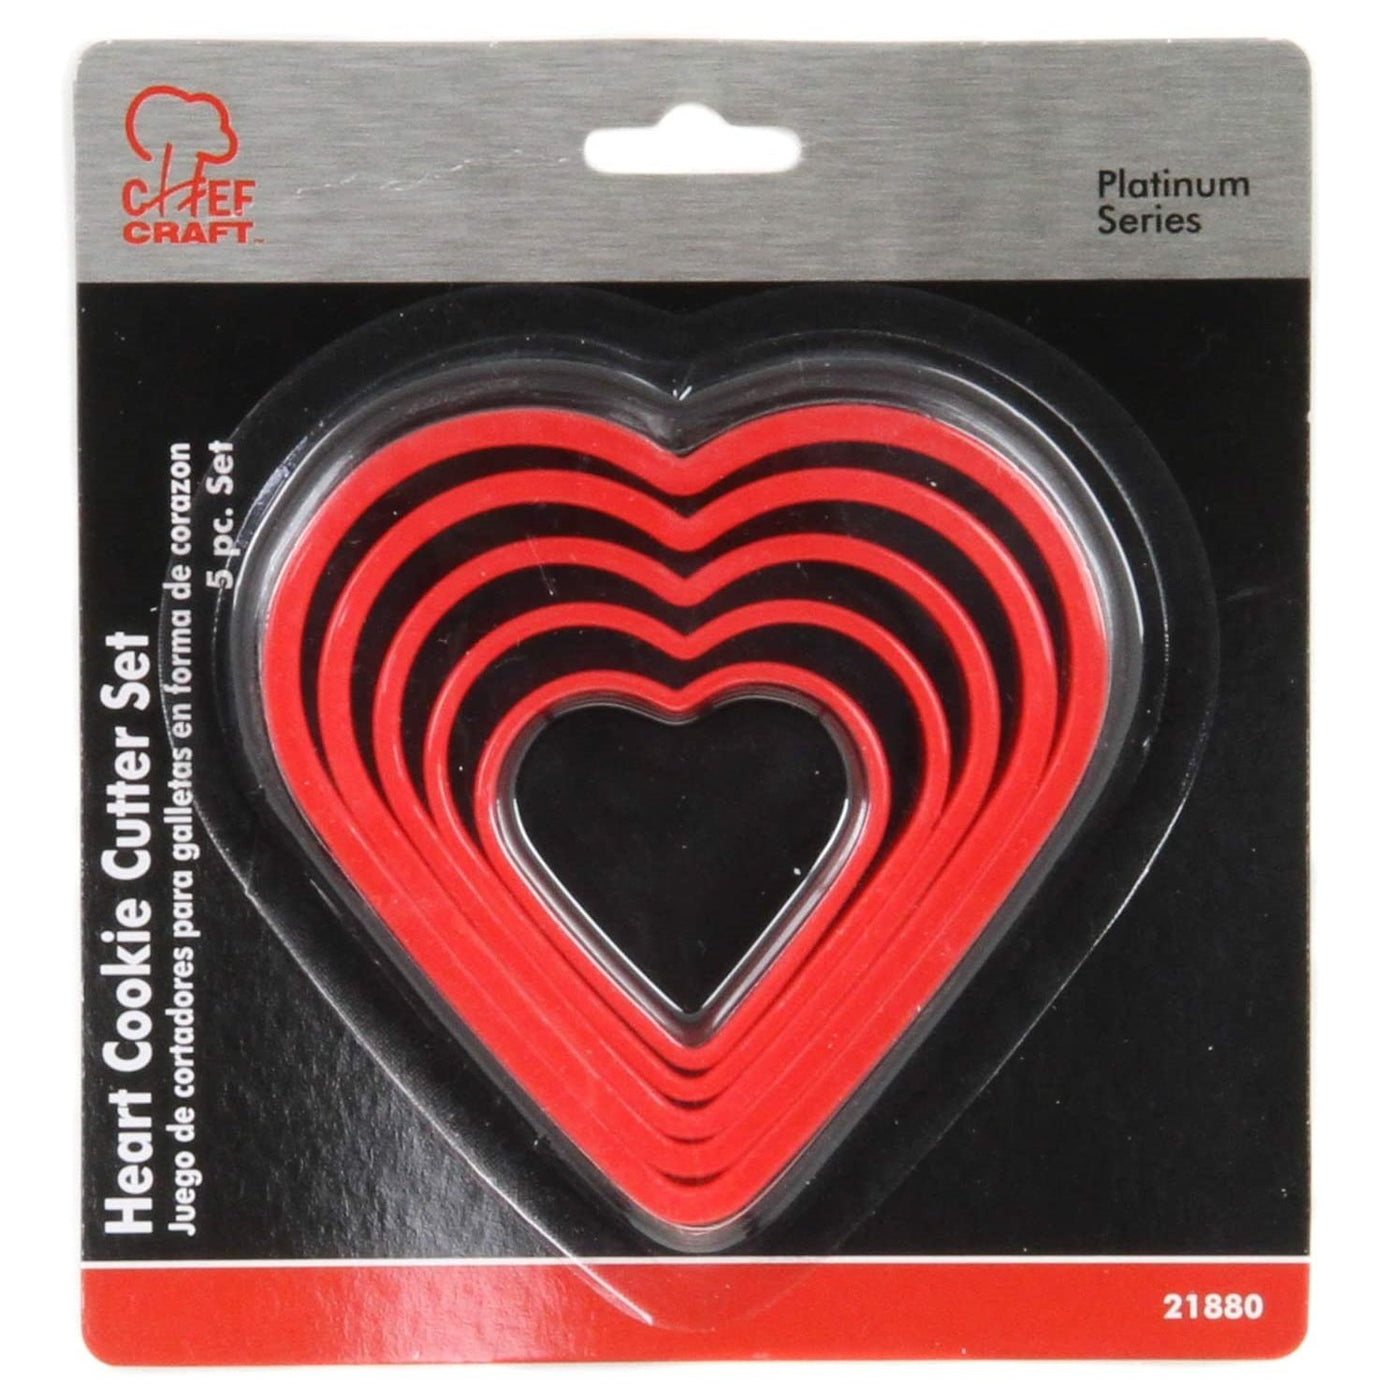 1set Heart Shaped Plastic Measuring Spoons For Baking, Set Of 4, Red